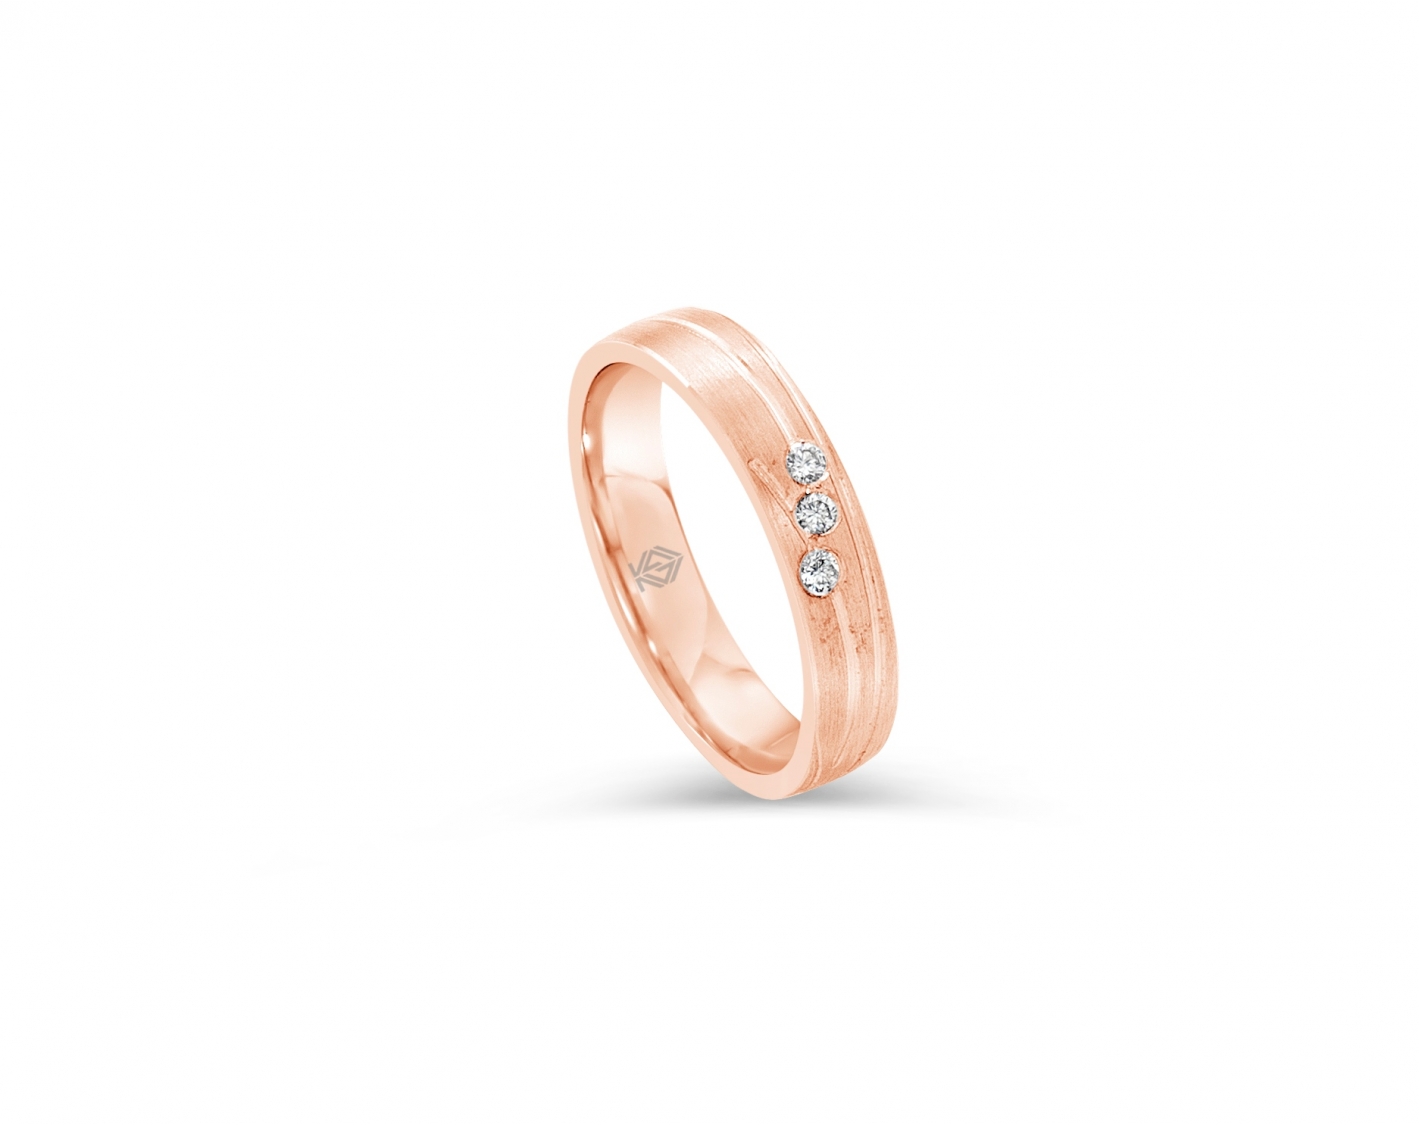 18k rose gold 4mm matte wedding ring set with three round diamonds and non-parallel inlays